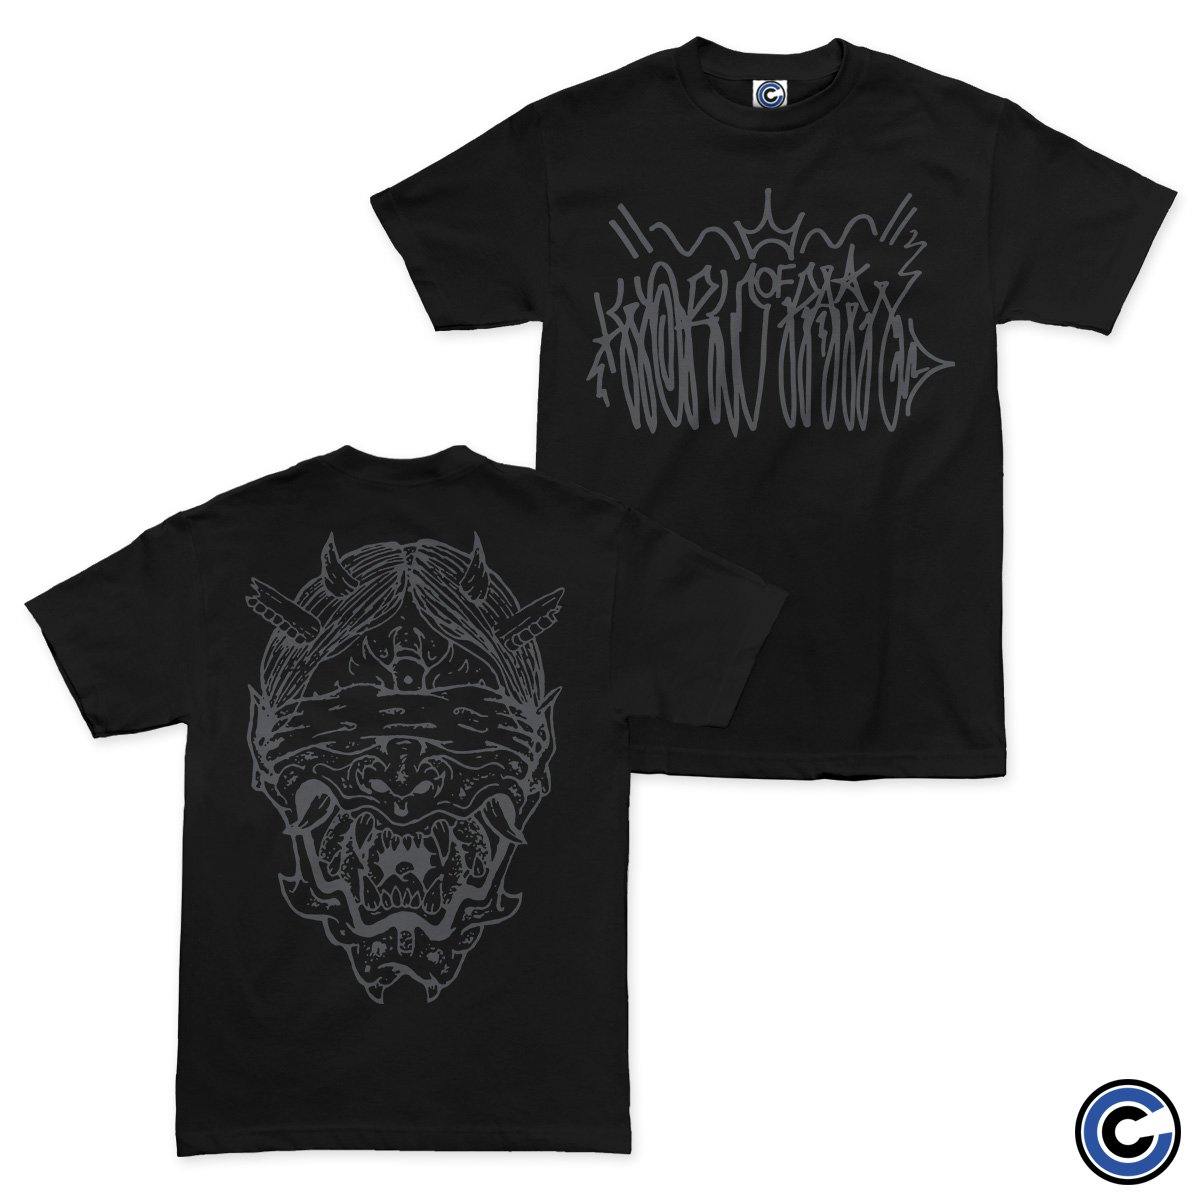 Buy – World of Pain "Demon Handstyle" Shirt – Band & Music Merch – Cold Cuts Merch